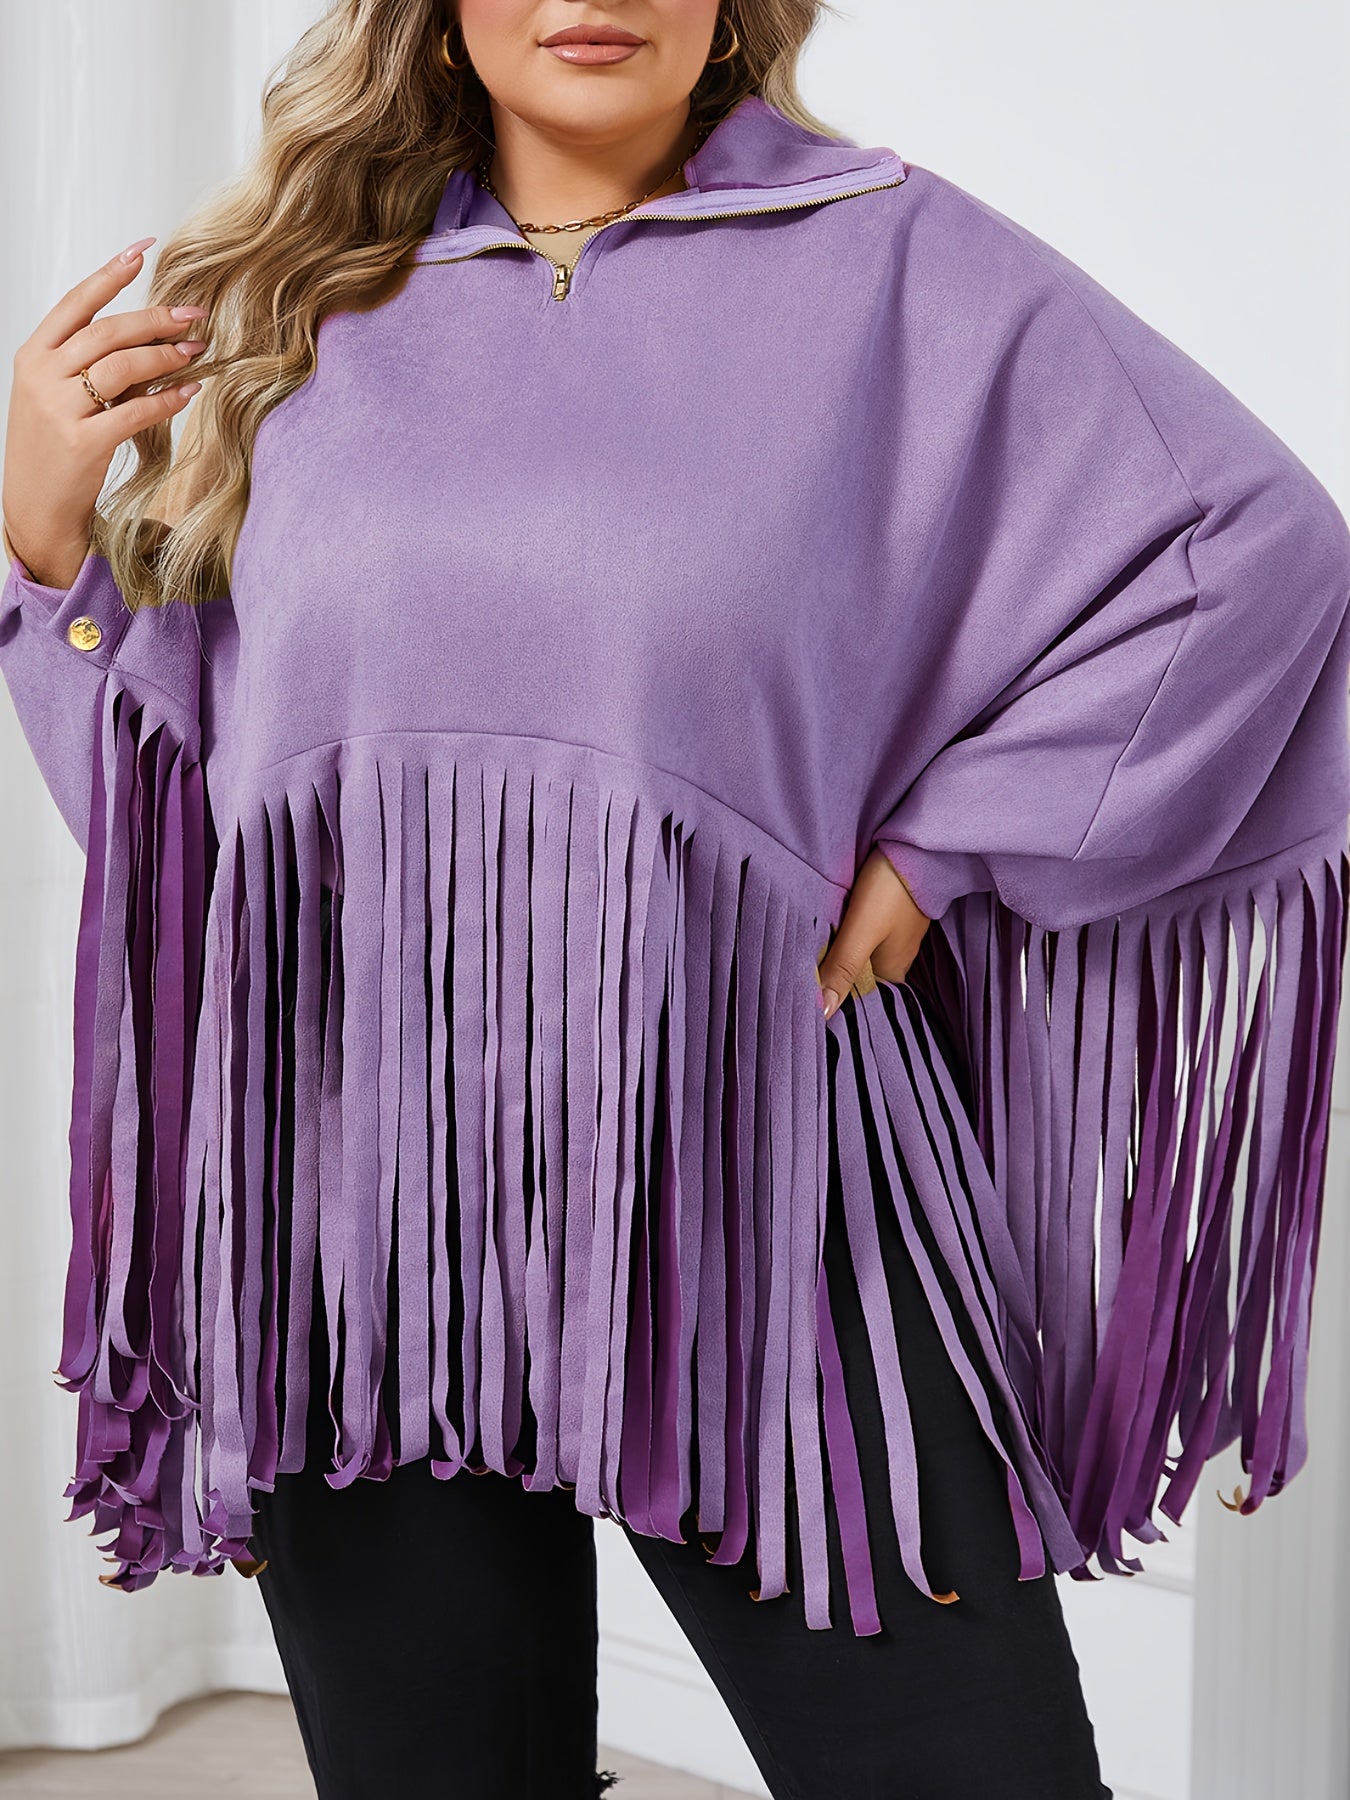 Person wearing a Maramalive™ Plus Size Trendy Top, Women's Plus Solid Batwing Sleeve Mock Neck Fringe Trim Cloak Top in light purple, standing indoors.